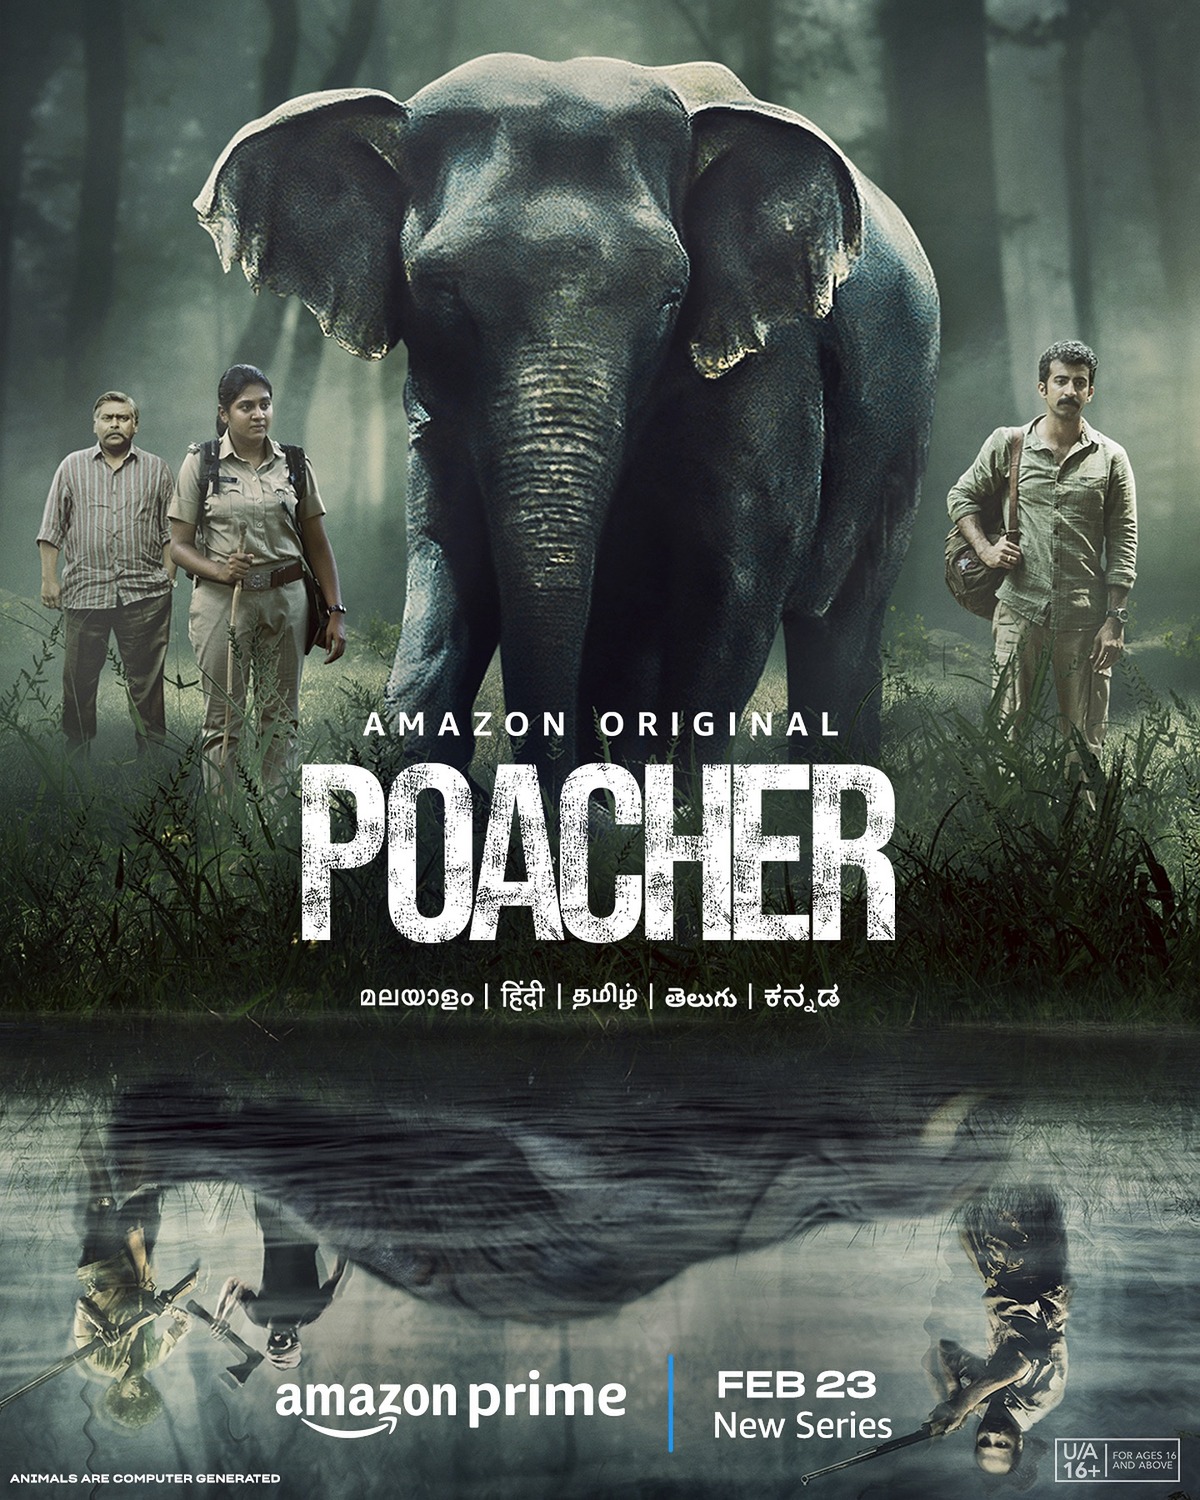 Extra Large TV Poster Image for Poacher (#2 of 2)